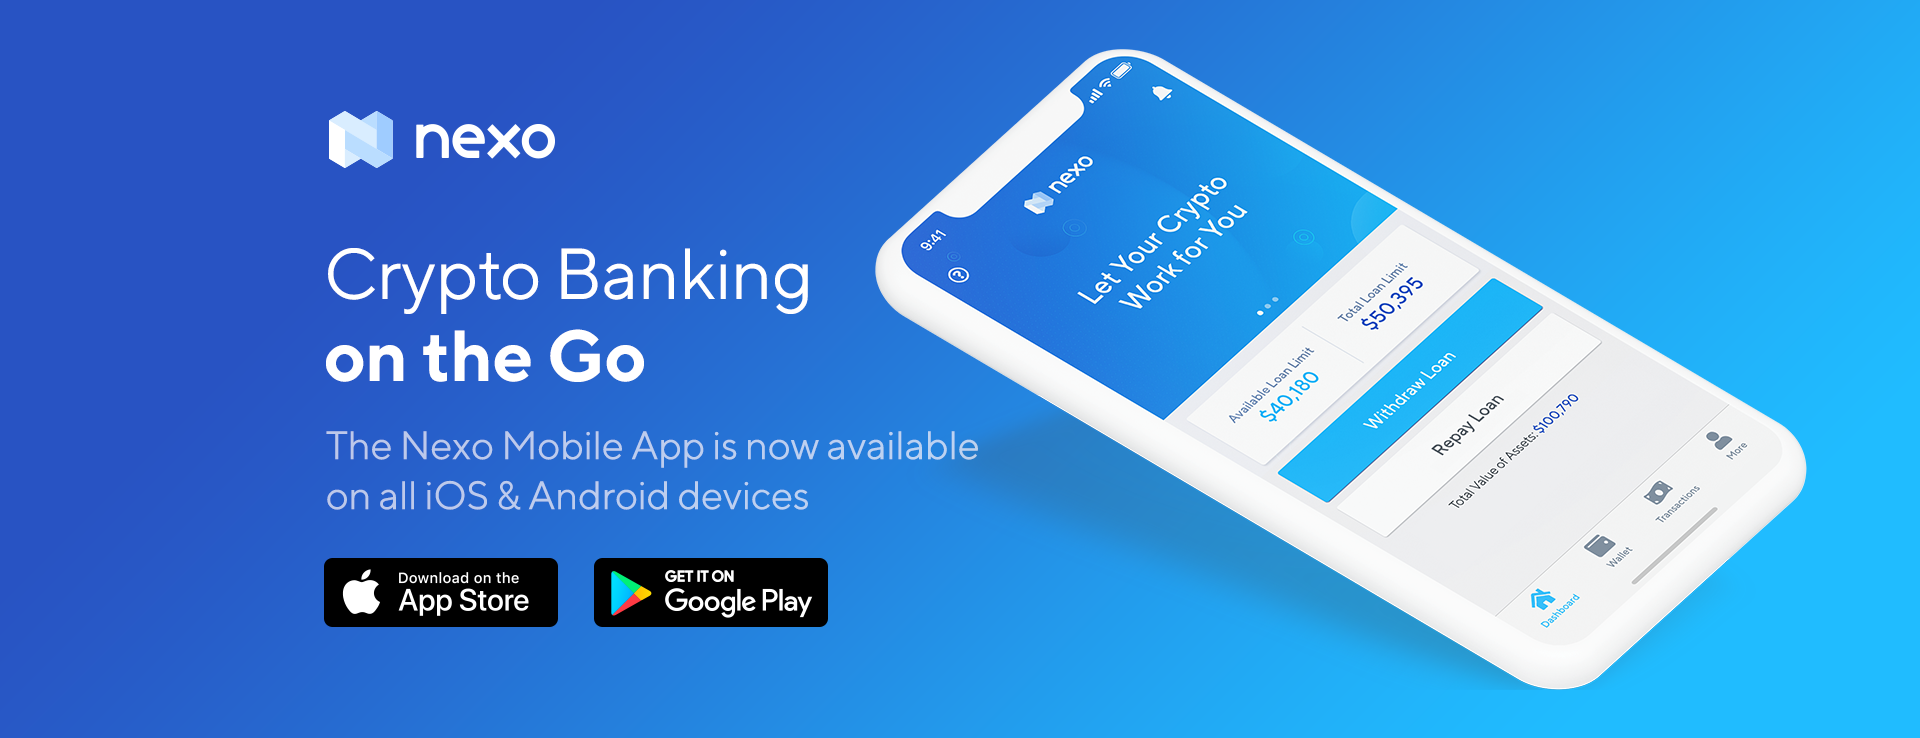 The Nexo Wallet App Now Available on iOS & Android